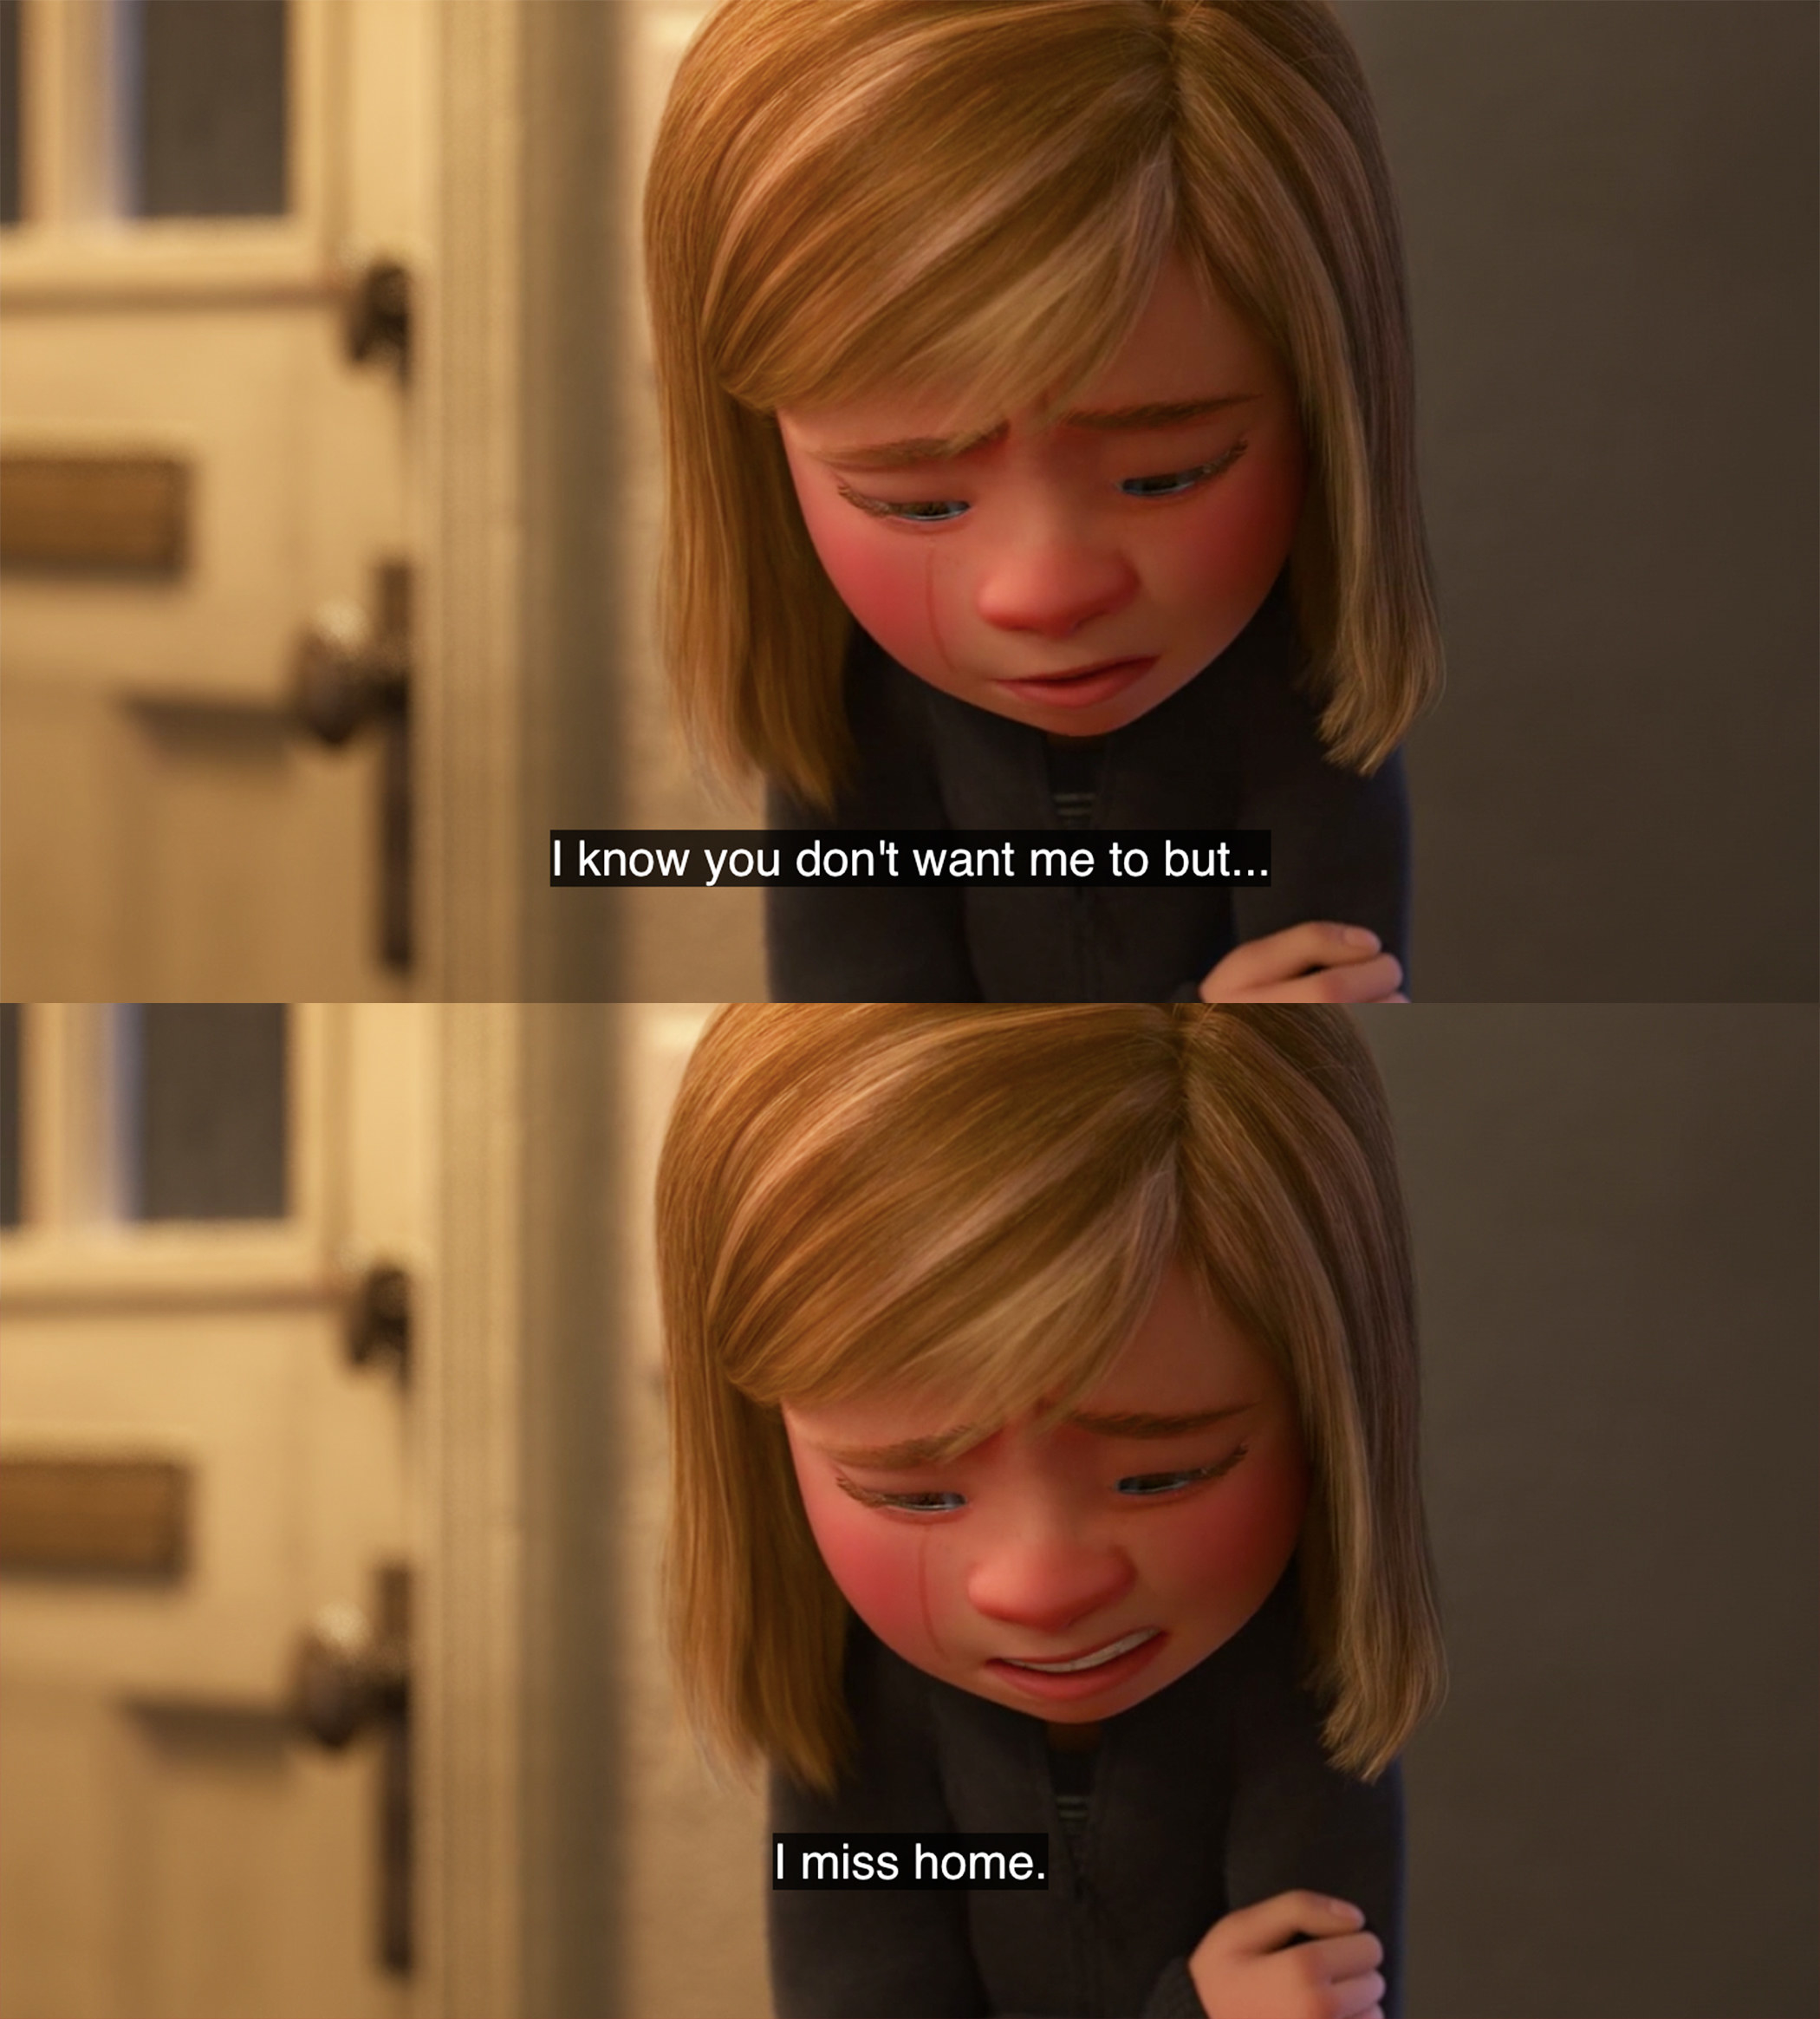 Riley tells her parents that, even though she knows they don&#x27;t want her to, she misses home